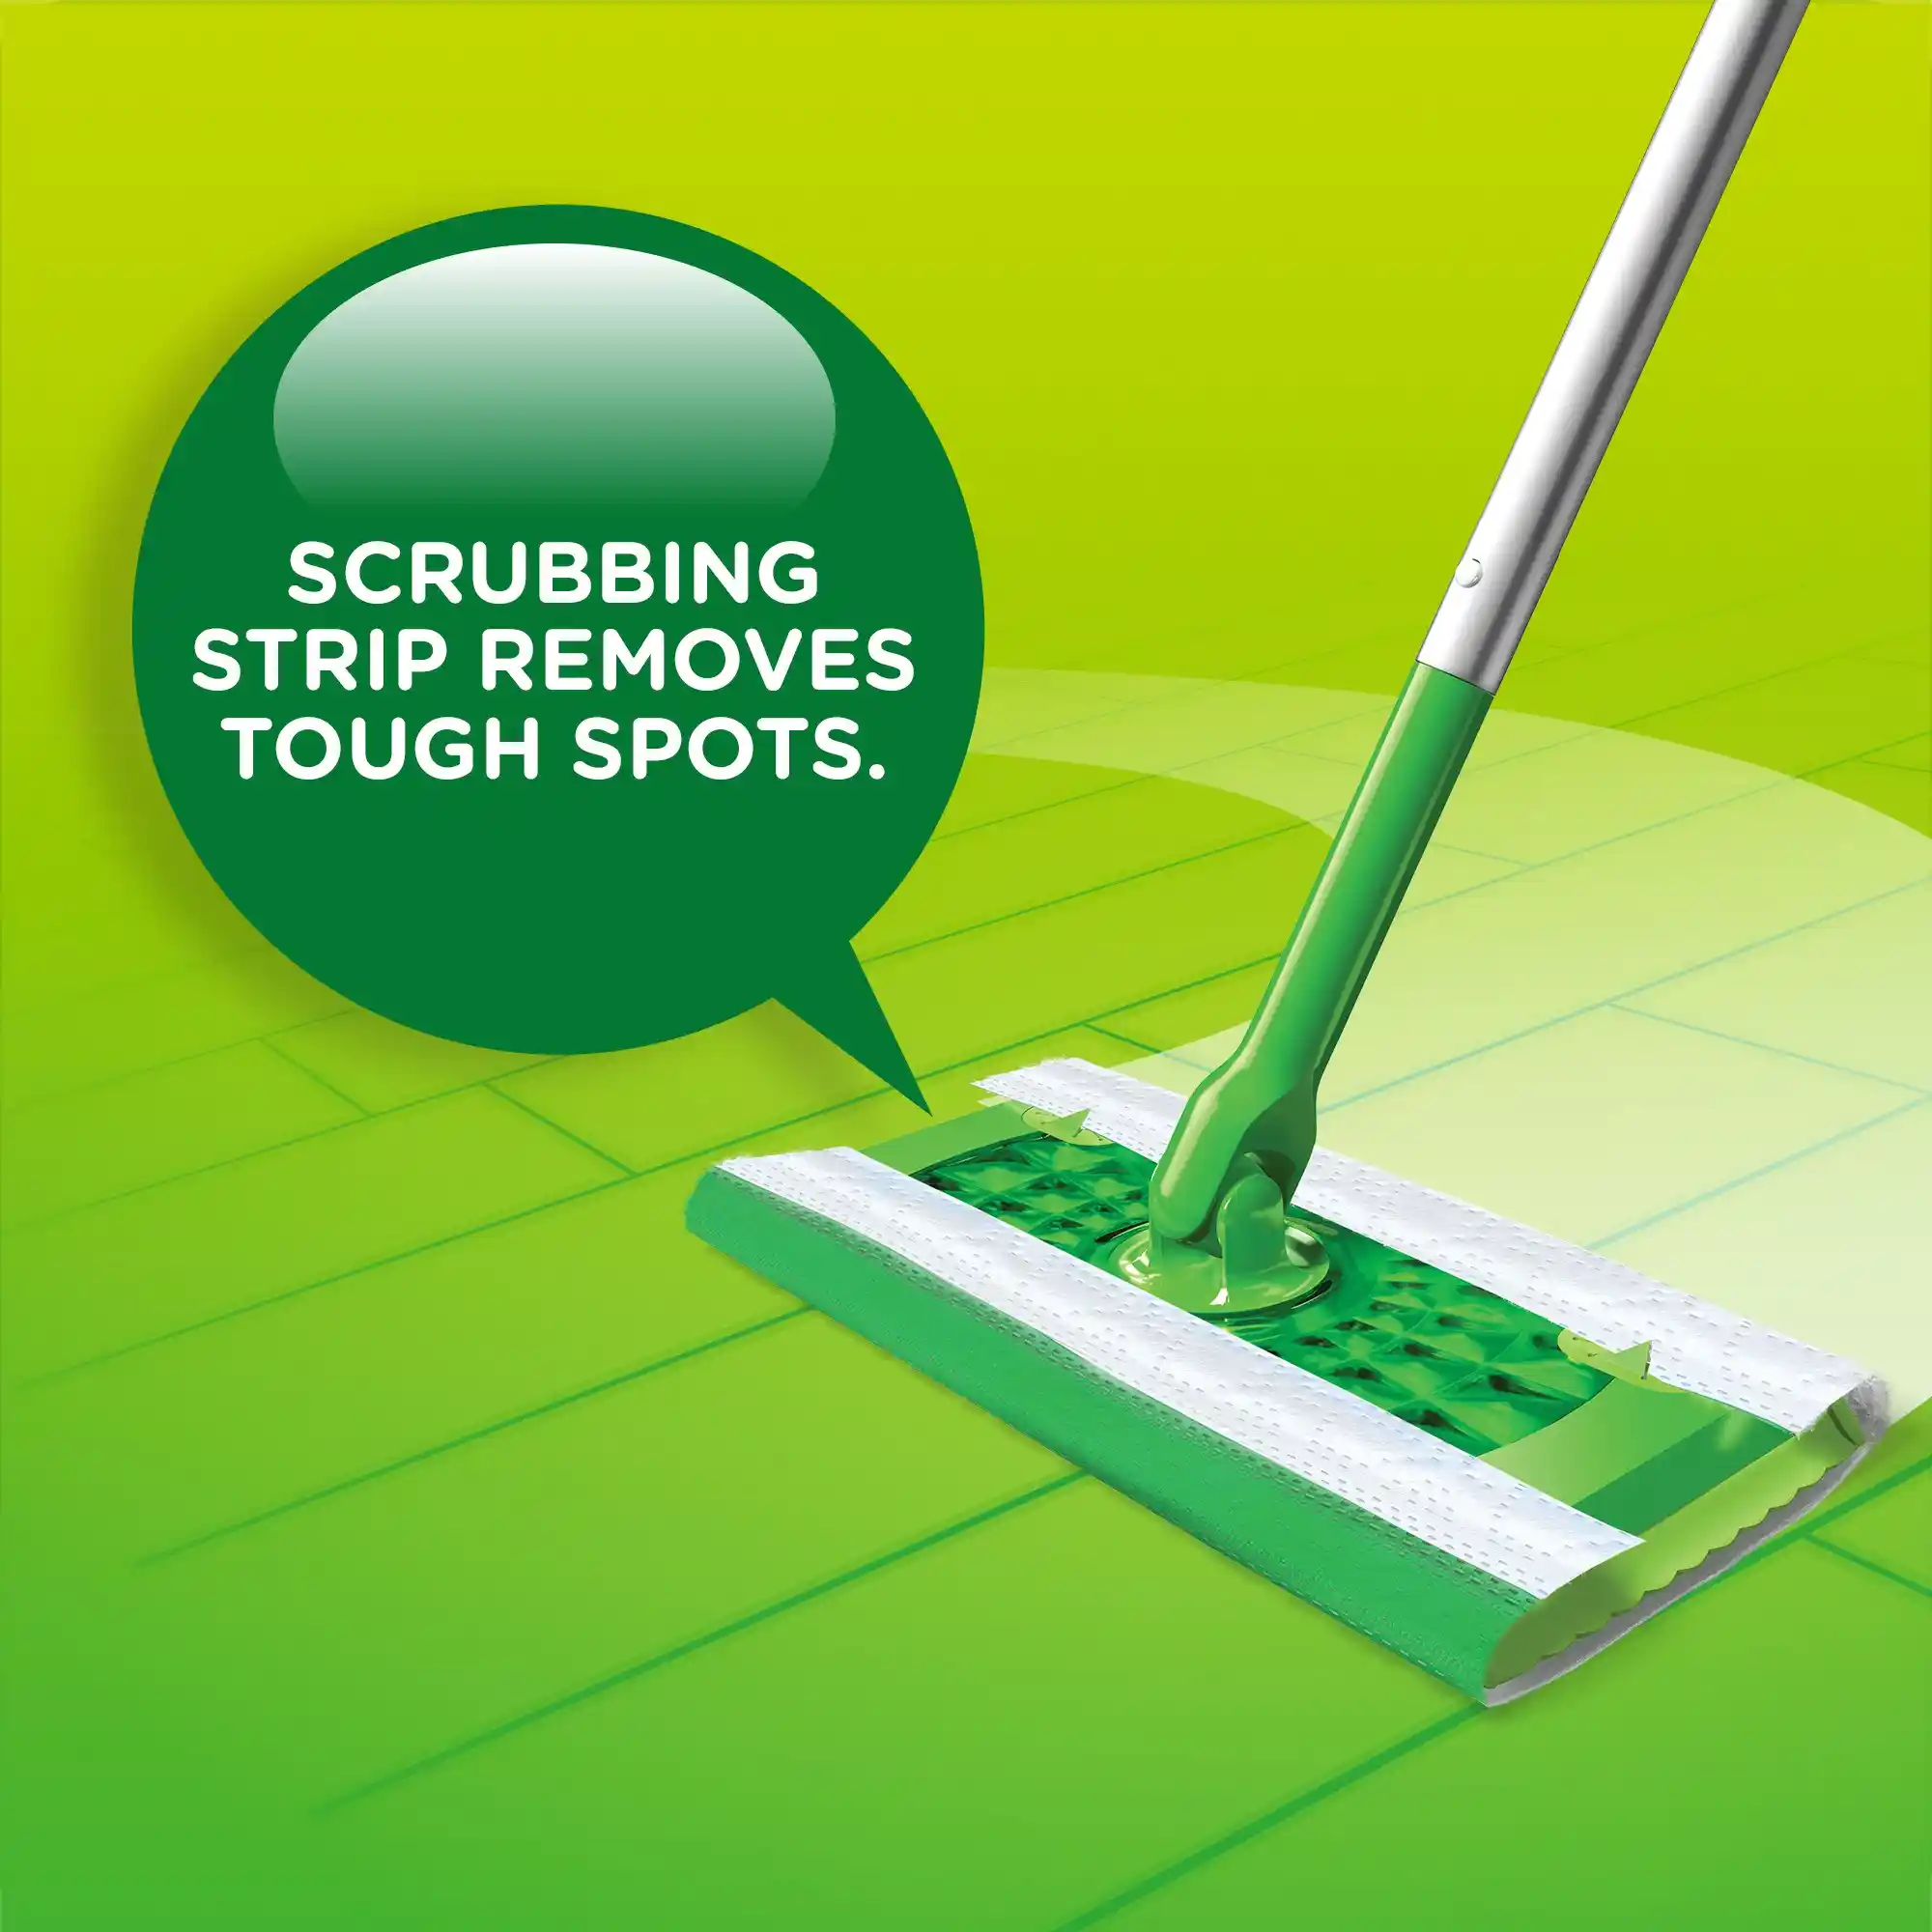 Swiffer Wet Mopping Cloths, Fresh Scent